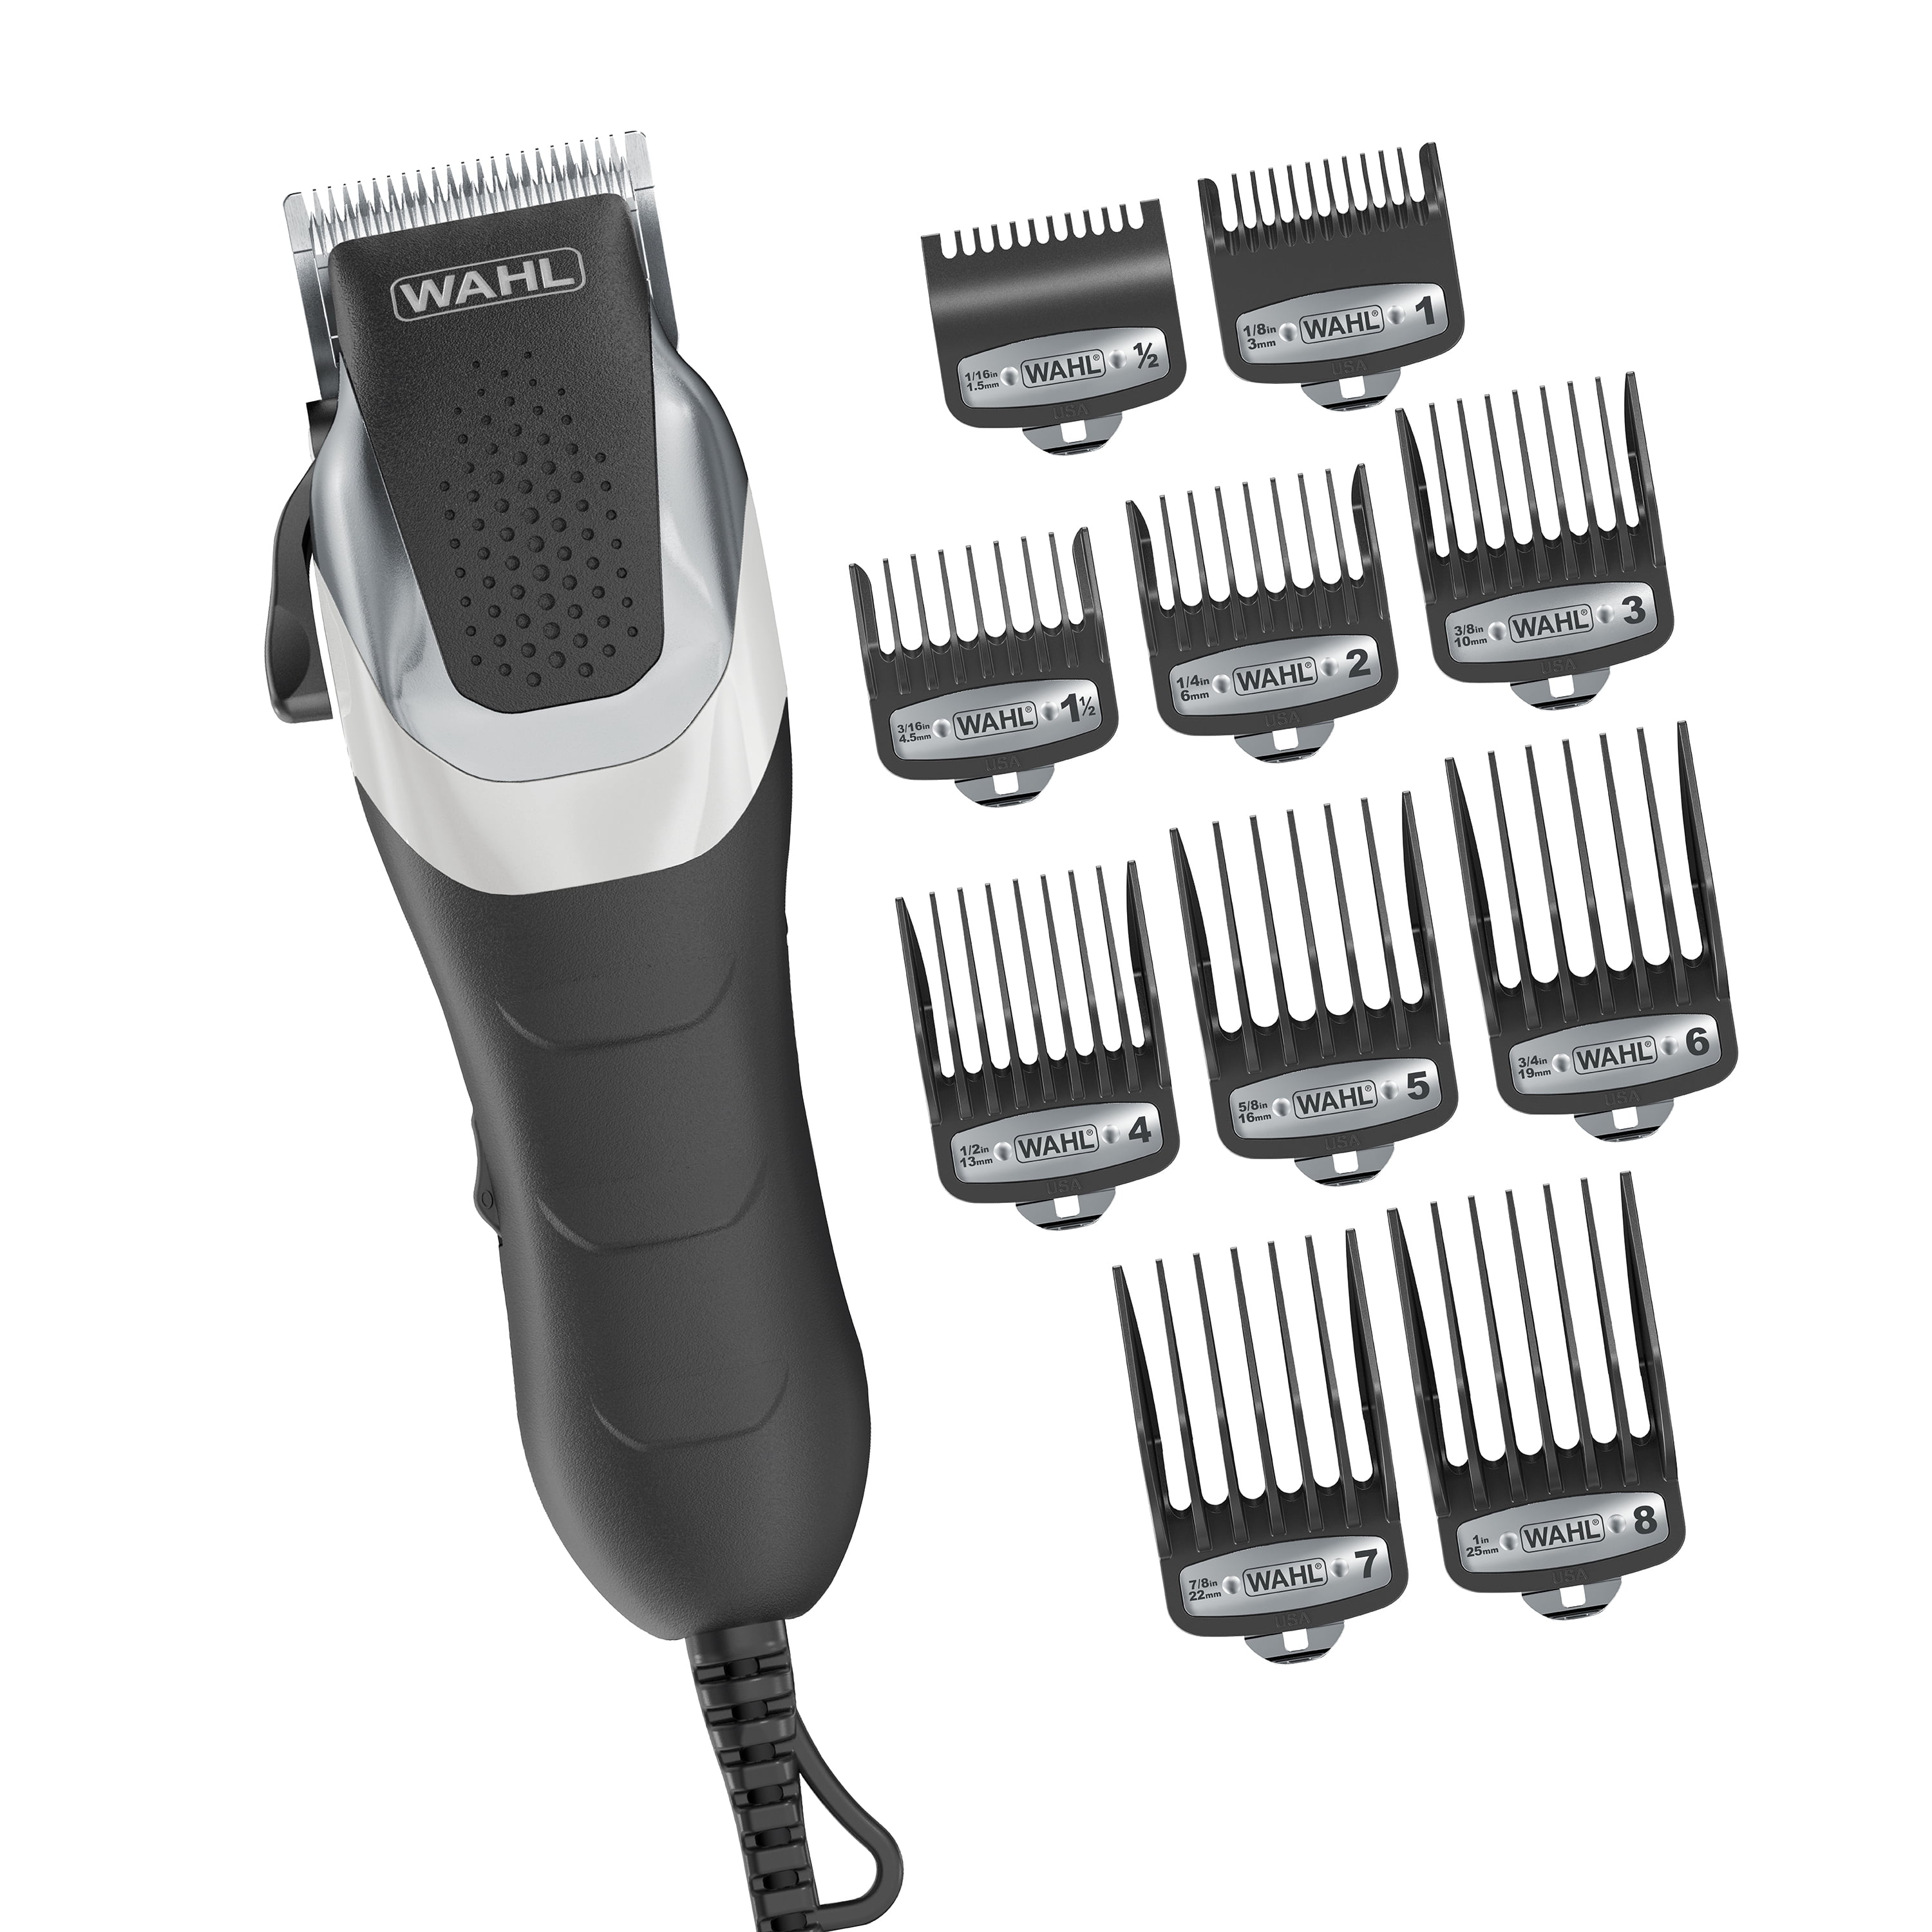 Wahl Pro Series Elite Clipper Haircutting Kit, Great for Men, Women, and  Children's Hair Cuts, 79775 